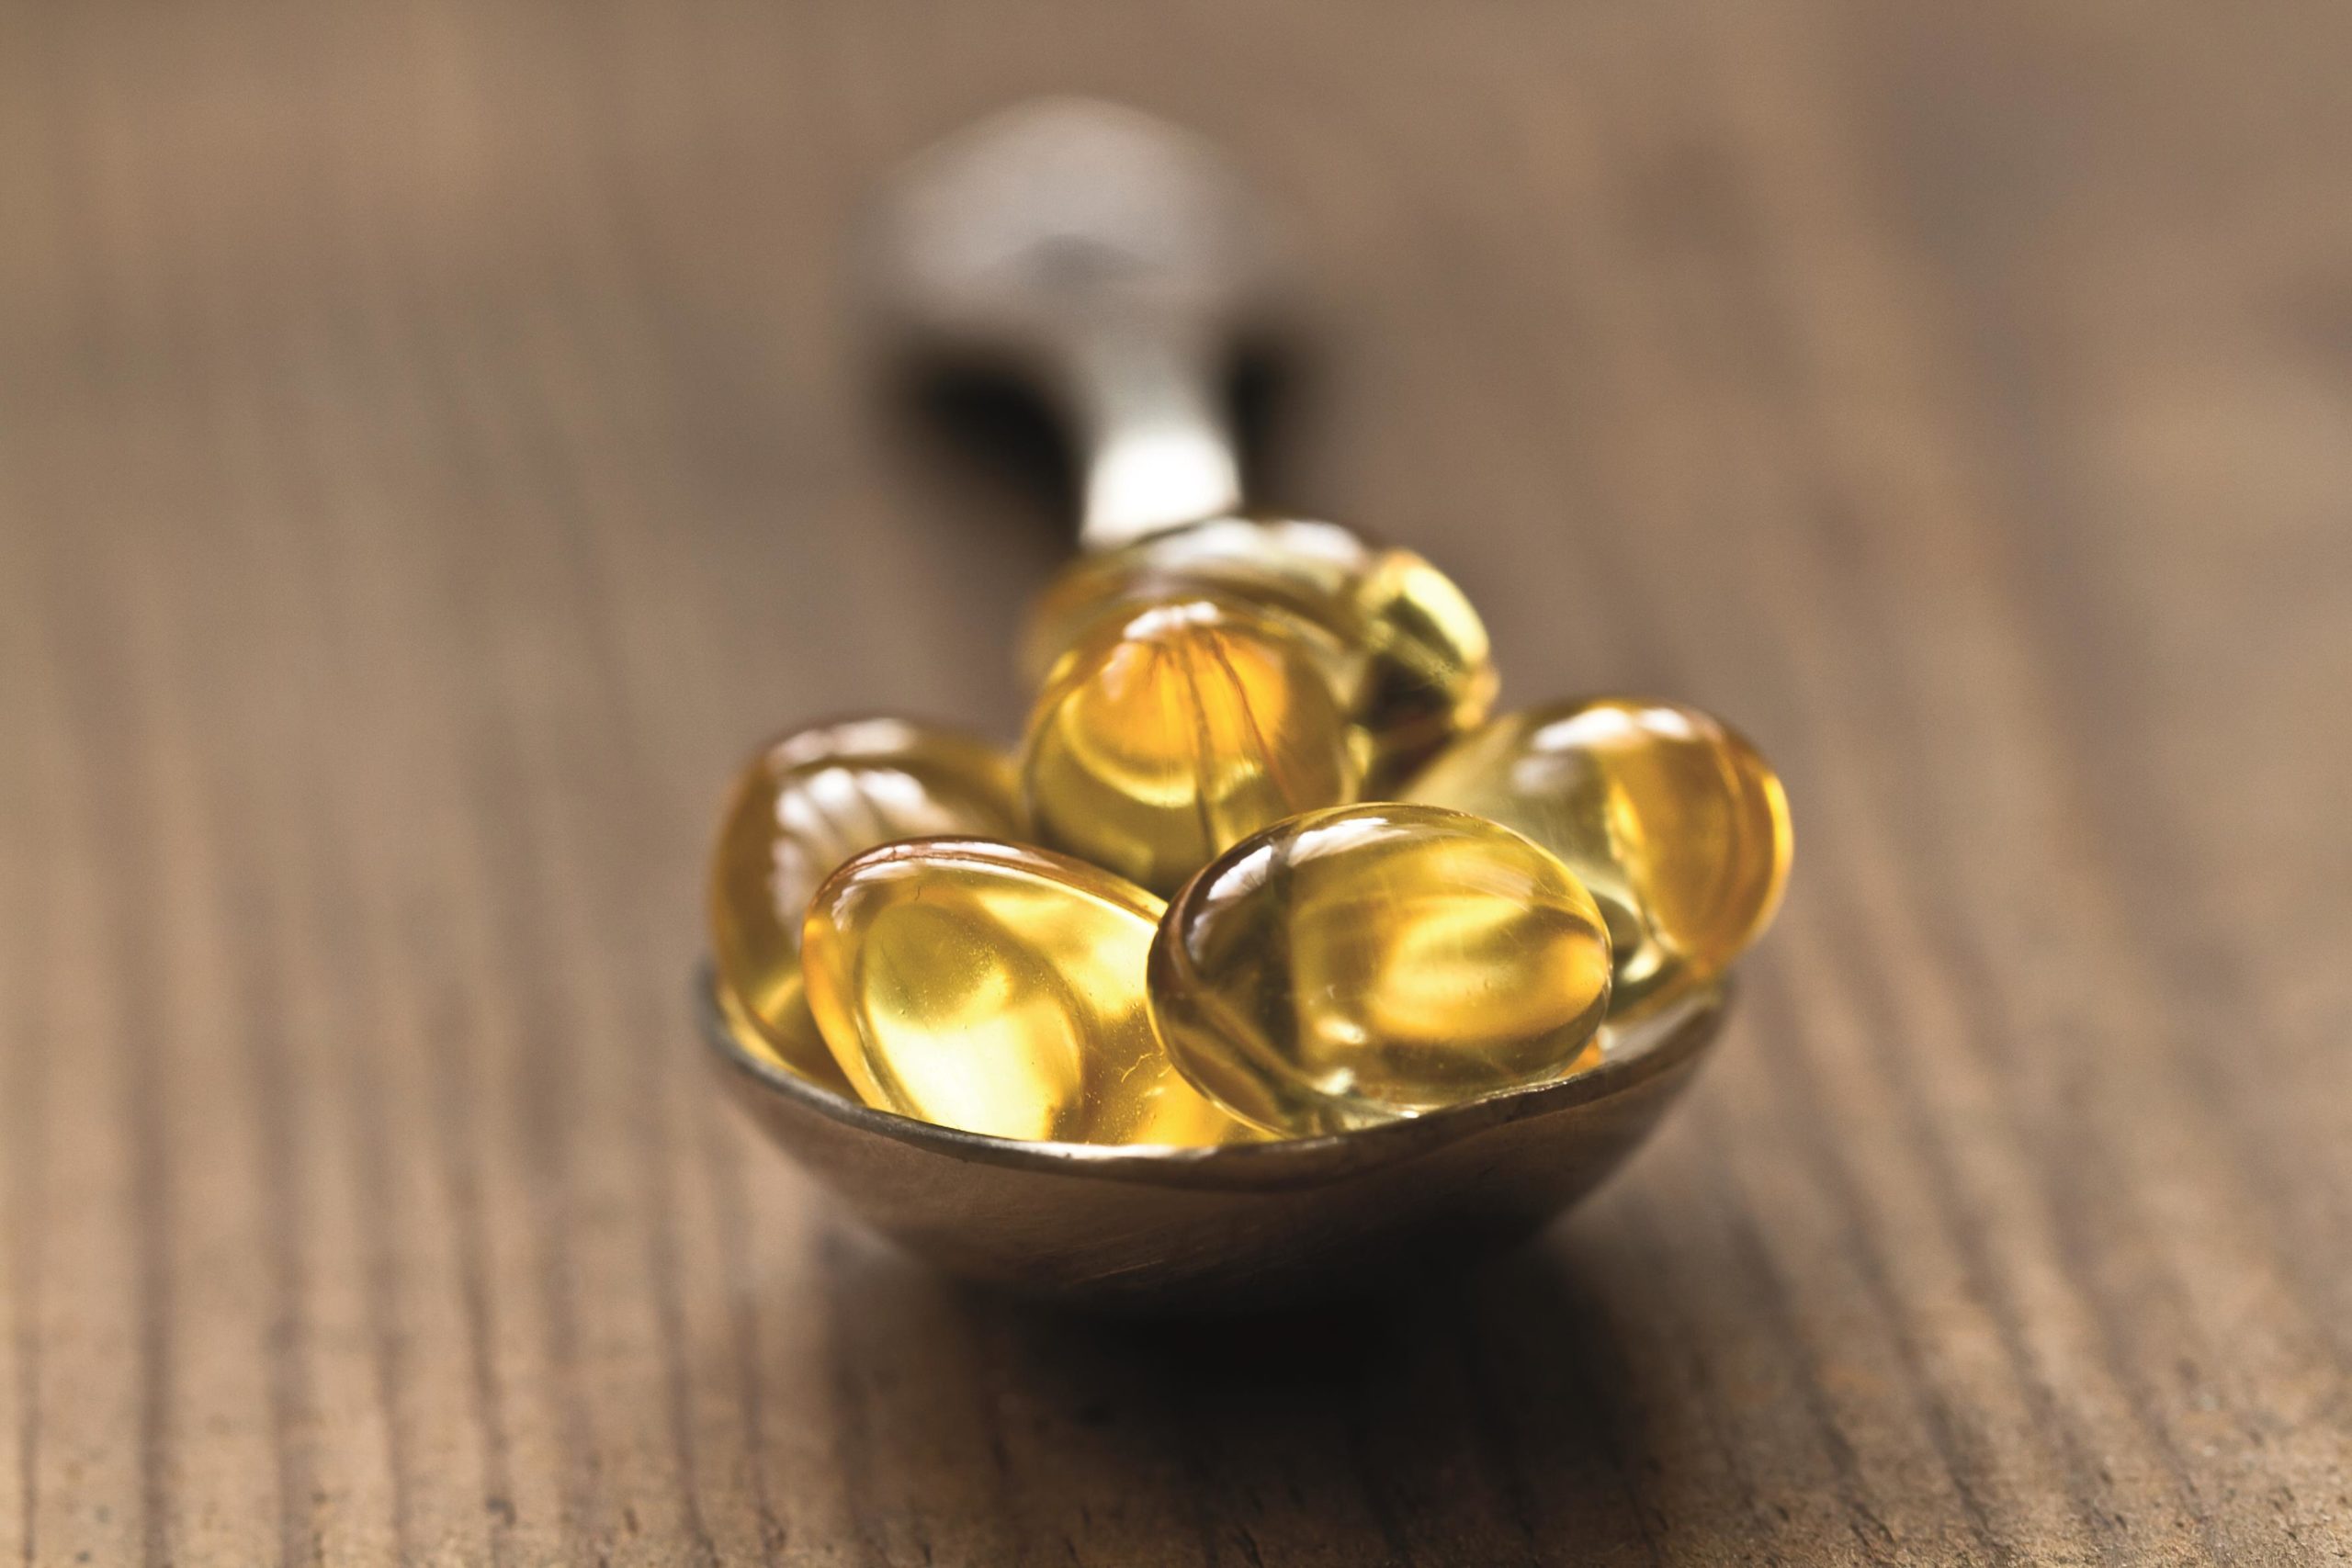 How to reduce the risks associated with vitamin D self-supplementation -  The Pharmaceutical Journal